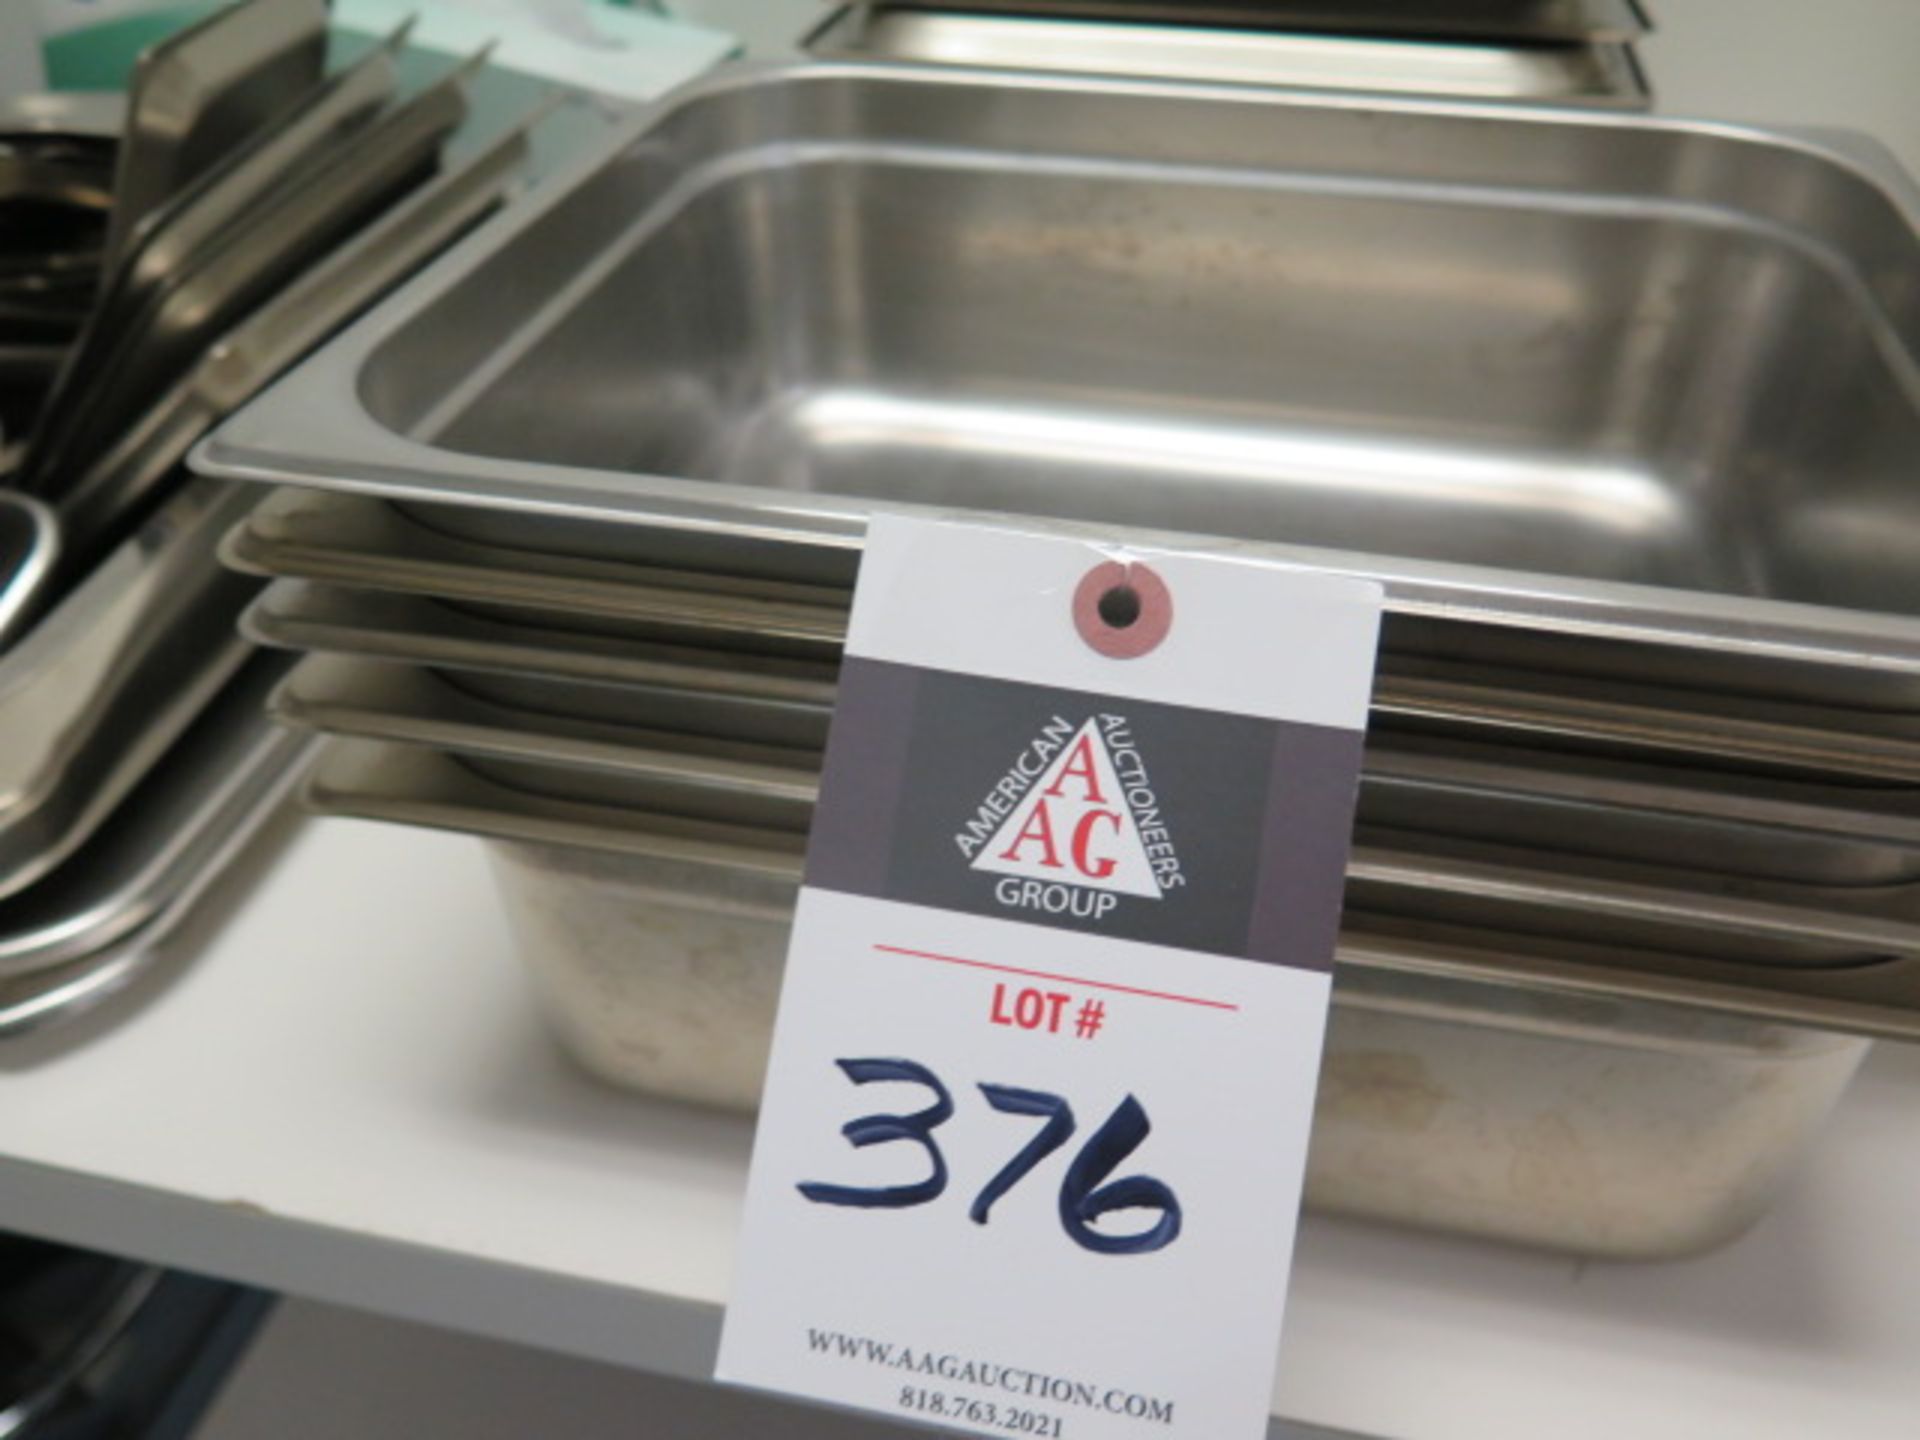 Stainless Steel Trays and Lids (SOLD AS-IS - NO WARRANTY)